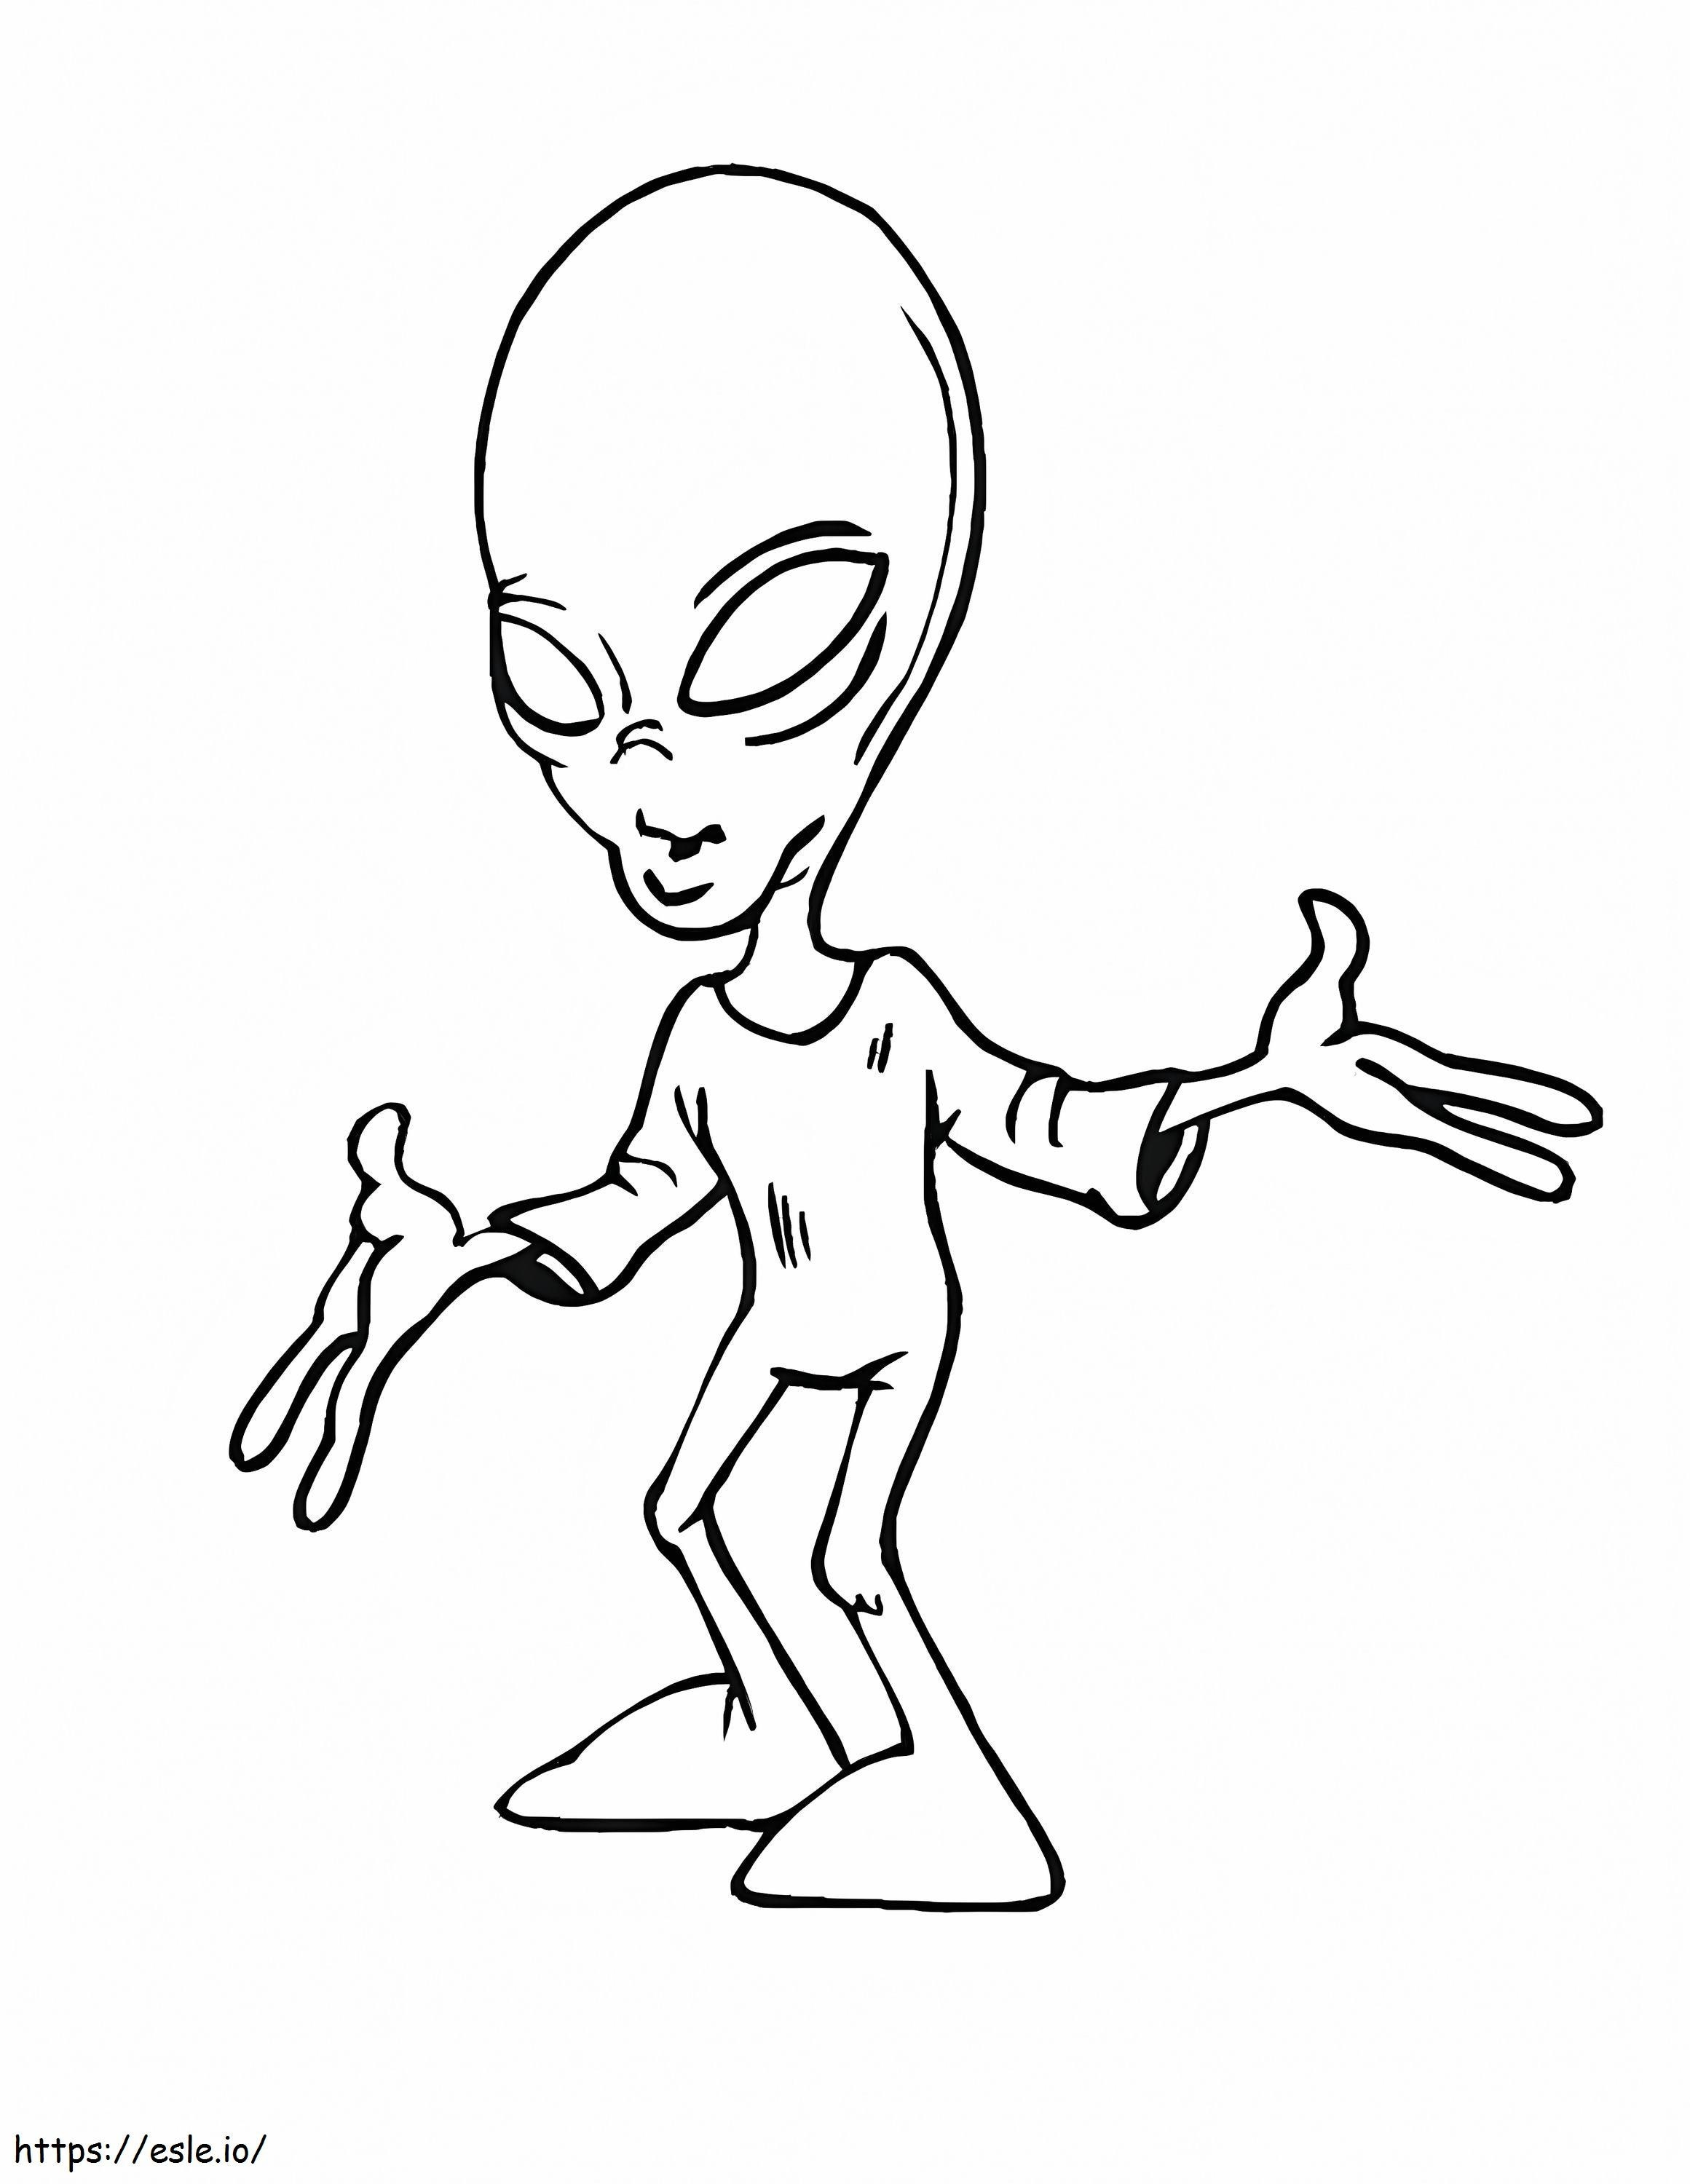 Normal Alien coloring page